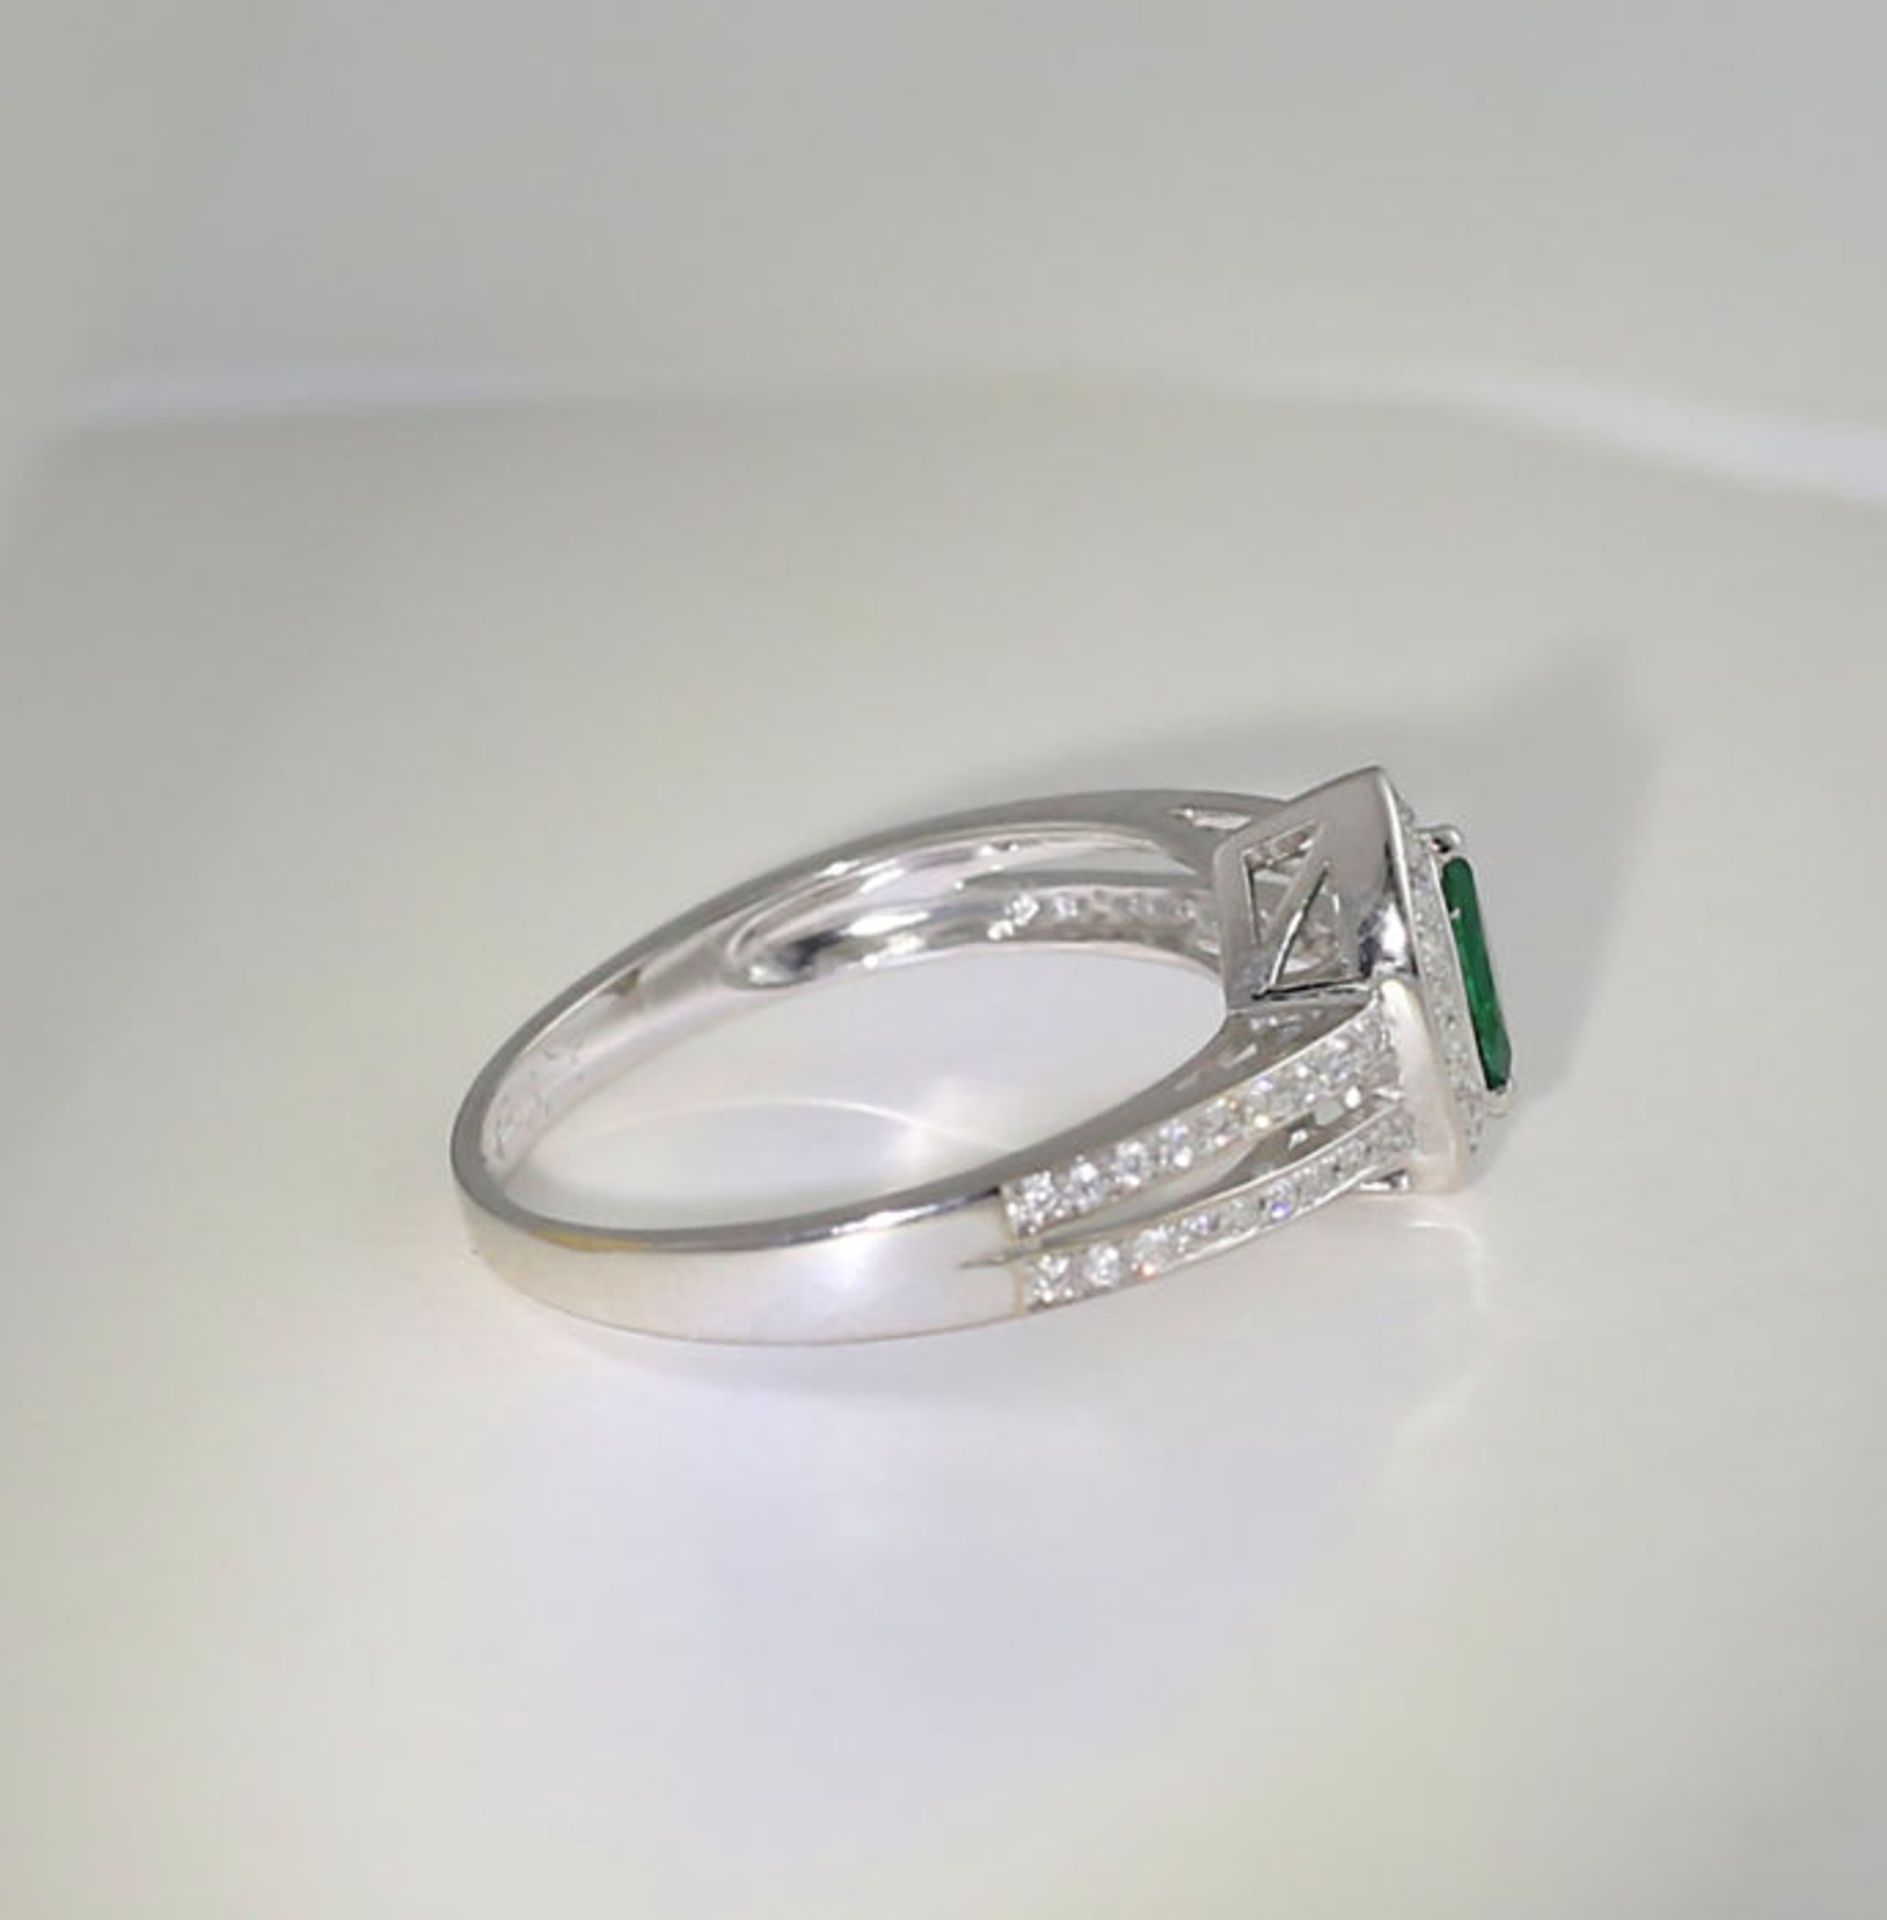 18 K / 750 White Gold Emerald and Diamond Ring - Image 5 of 6